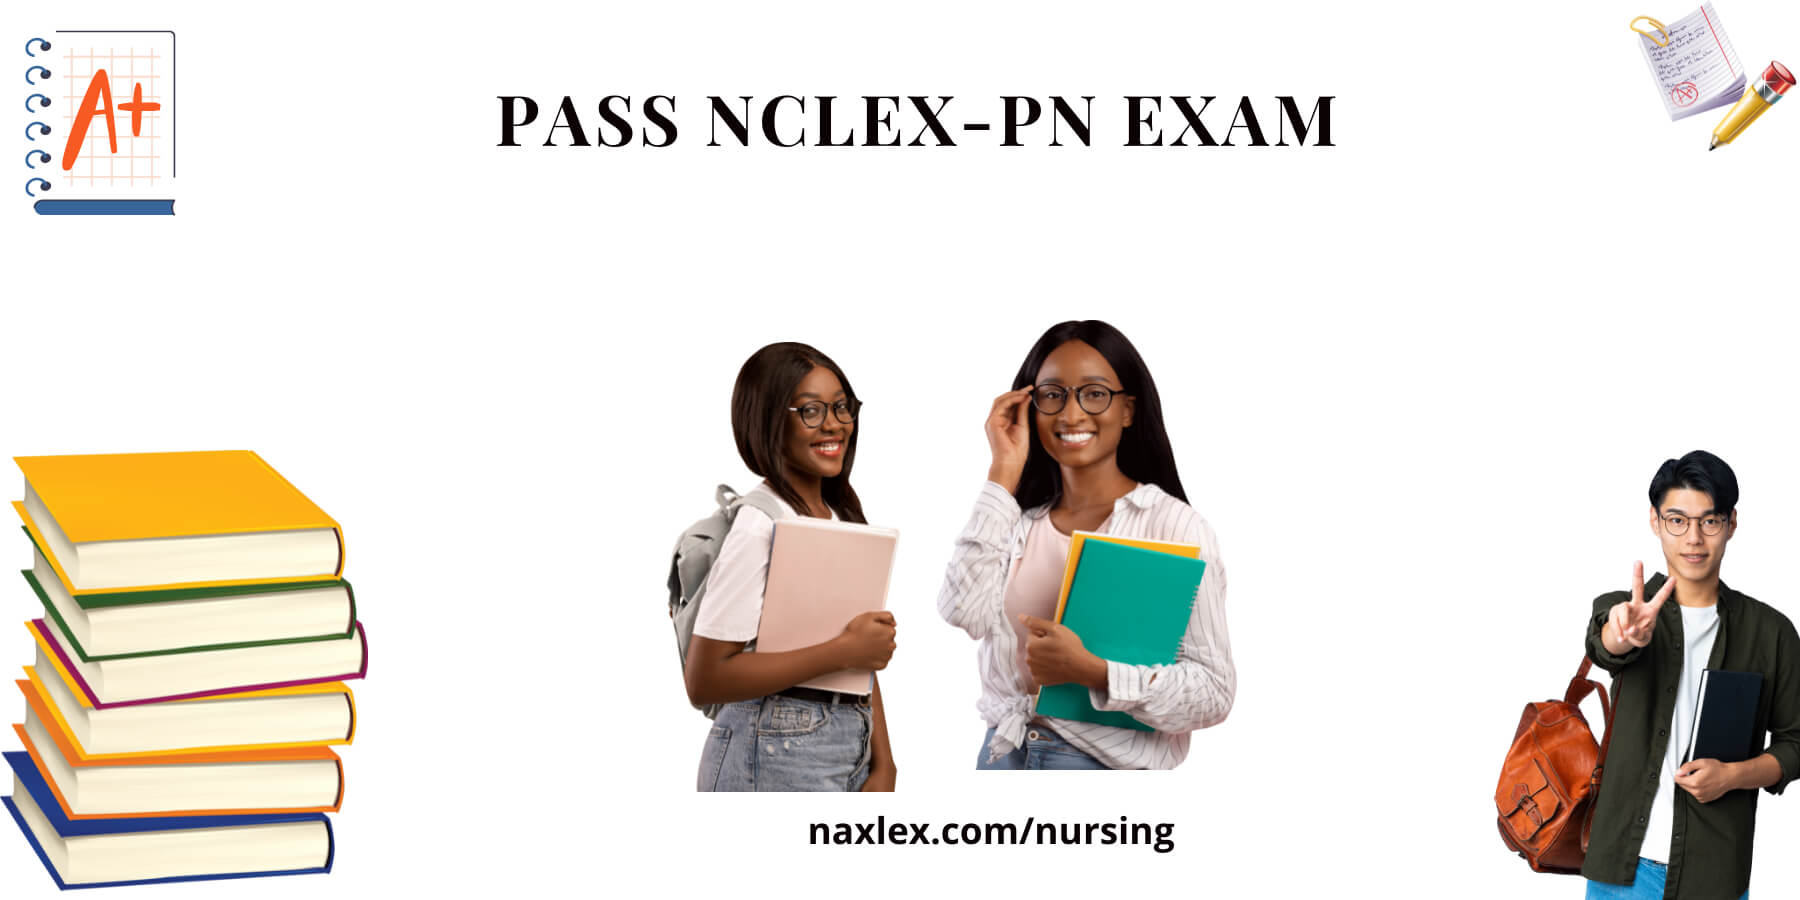 How to Pass the NCLEX-PN Exam